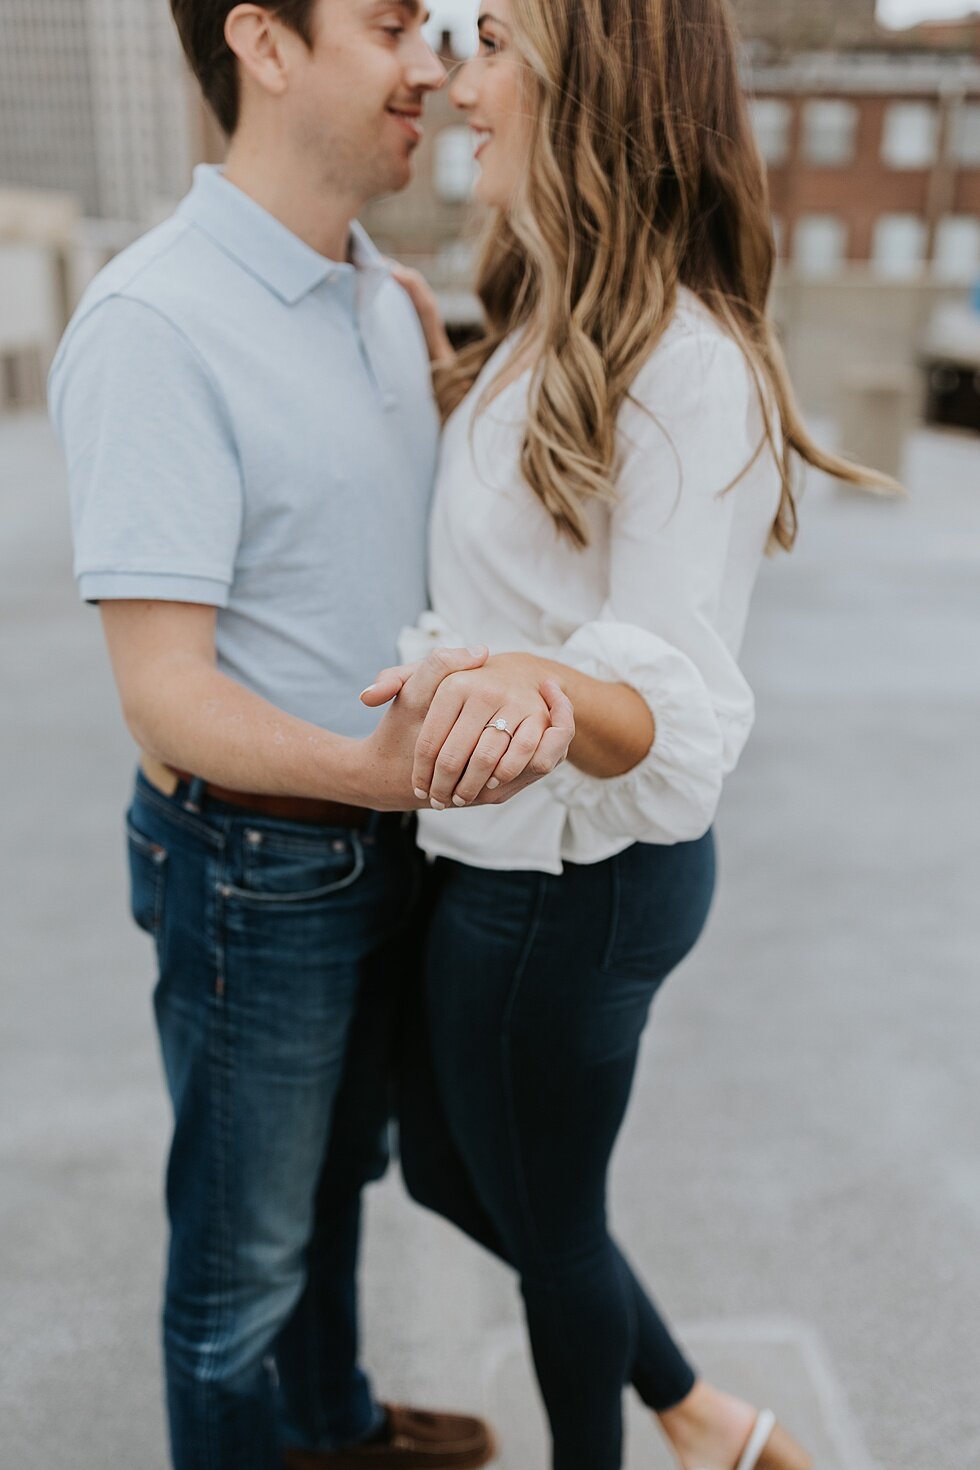  Rooftop engagement session in Louisville, Kentucky. getting married outdoor session engaged couple together wedding preparation love excited stunning relationship #engagementphotos #midwestphotographer #kywedding #louisville #rooftop #stjamescourt #